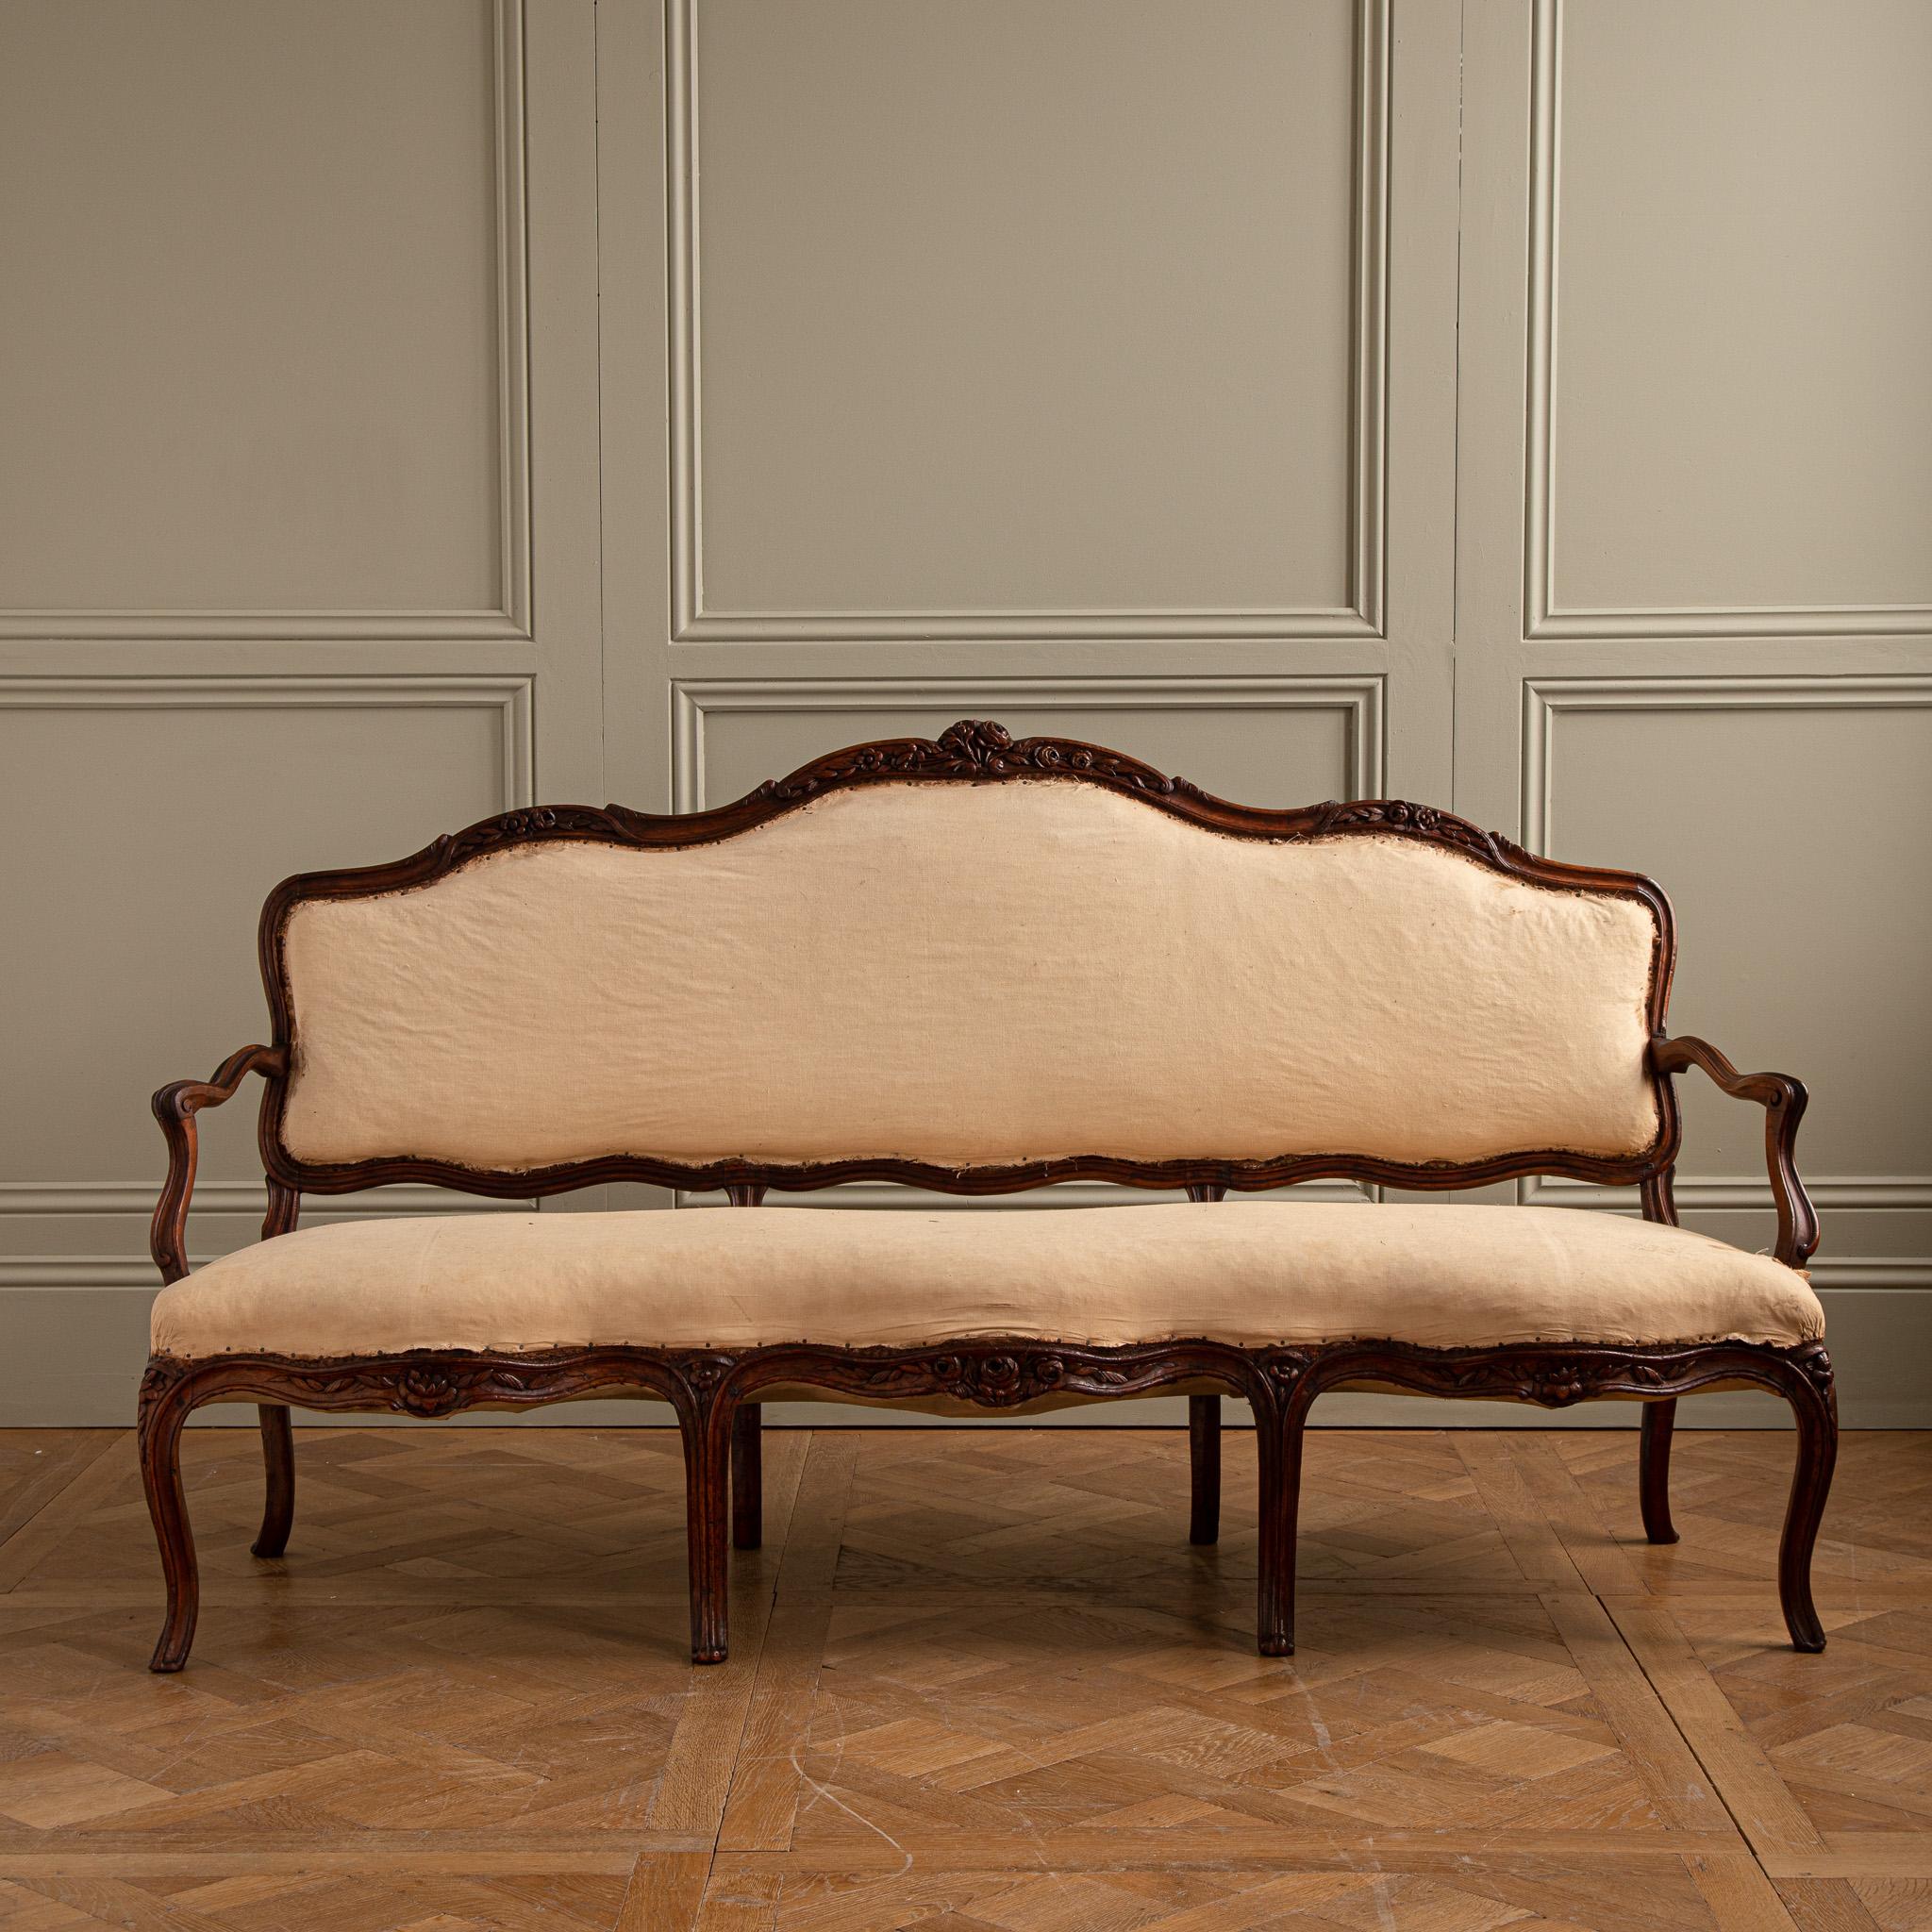 Sofa in Walnut,molded and sculpted backrest with triple convolution,recessed armrests,resting on eight arched serpentine legs.
of the Louis XV Period.
We can re cover the Sofa upon request.
We can source fabric or you can also supply your own.
